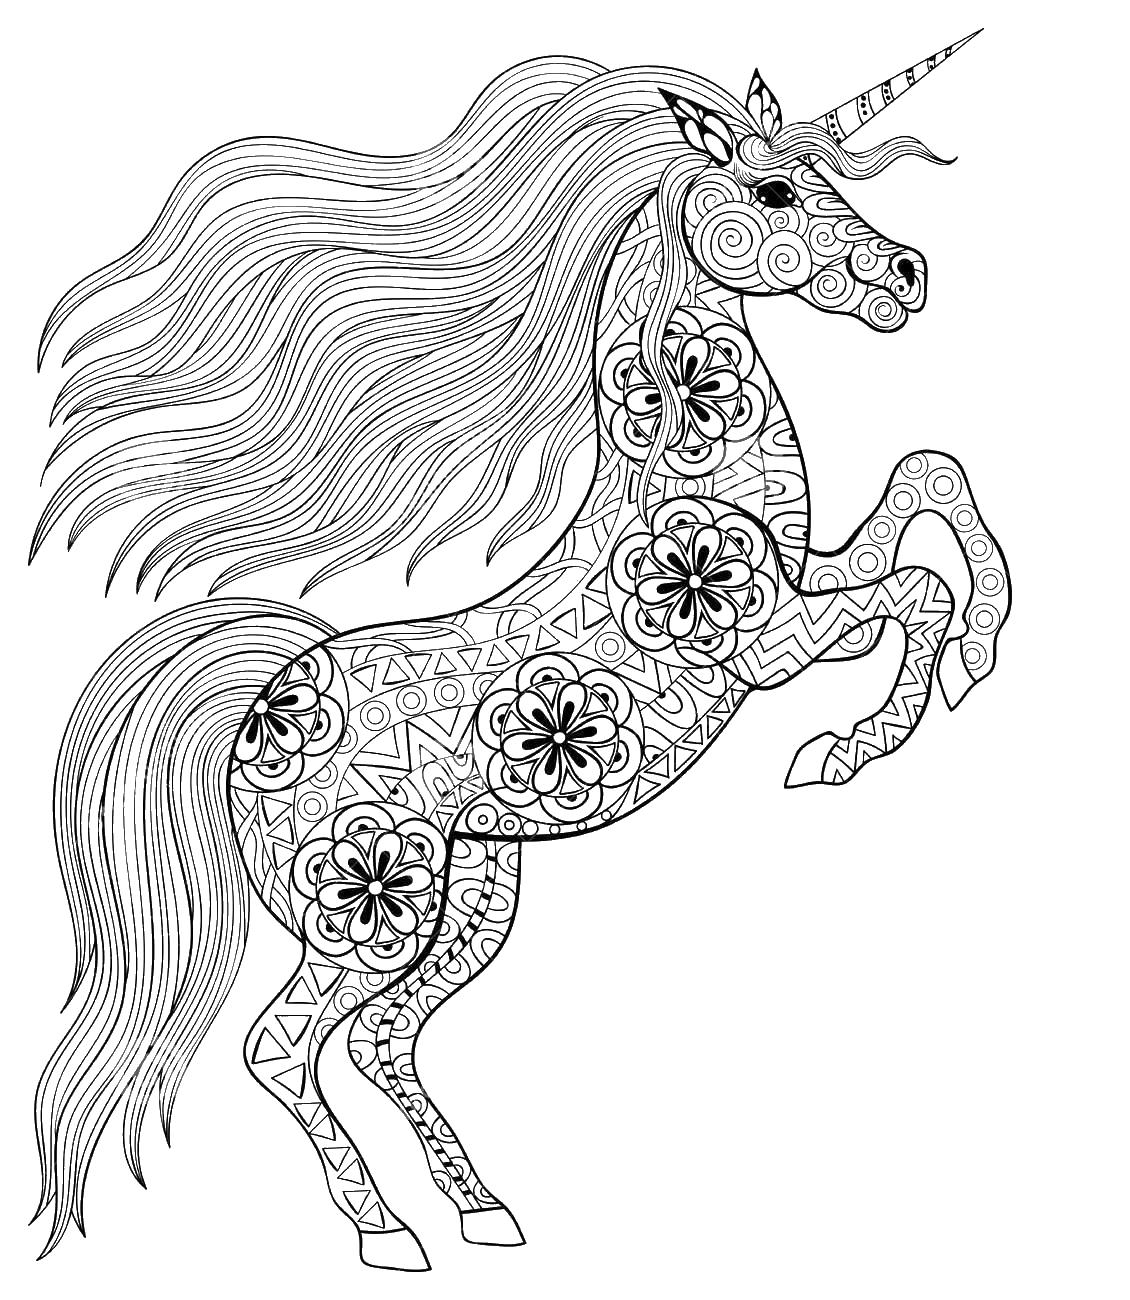 Coloring pages anti-stress for children to download and print for free